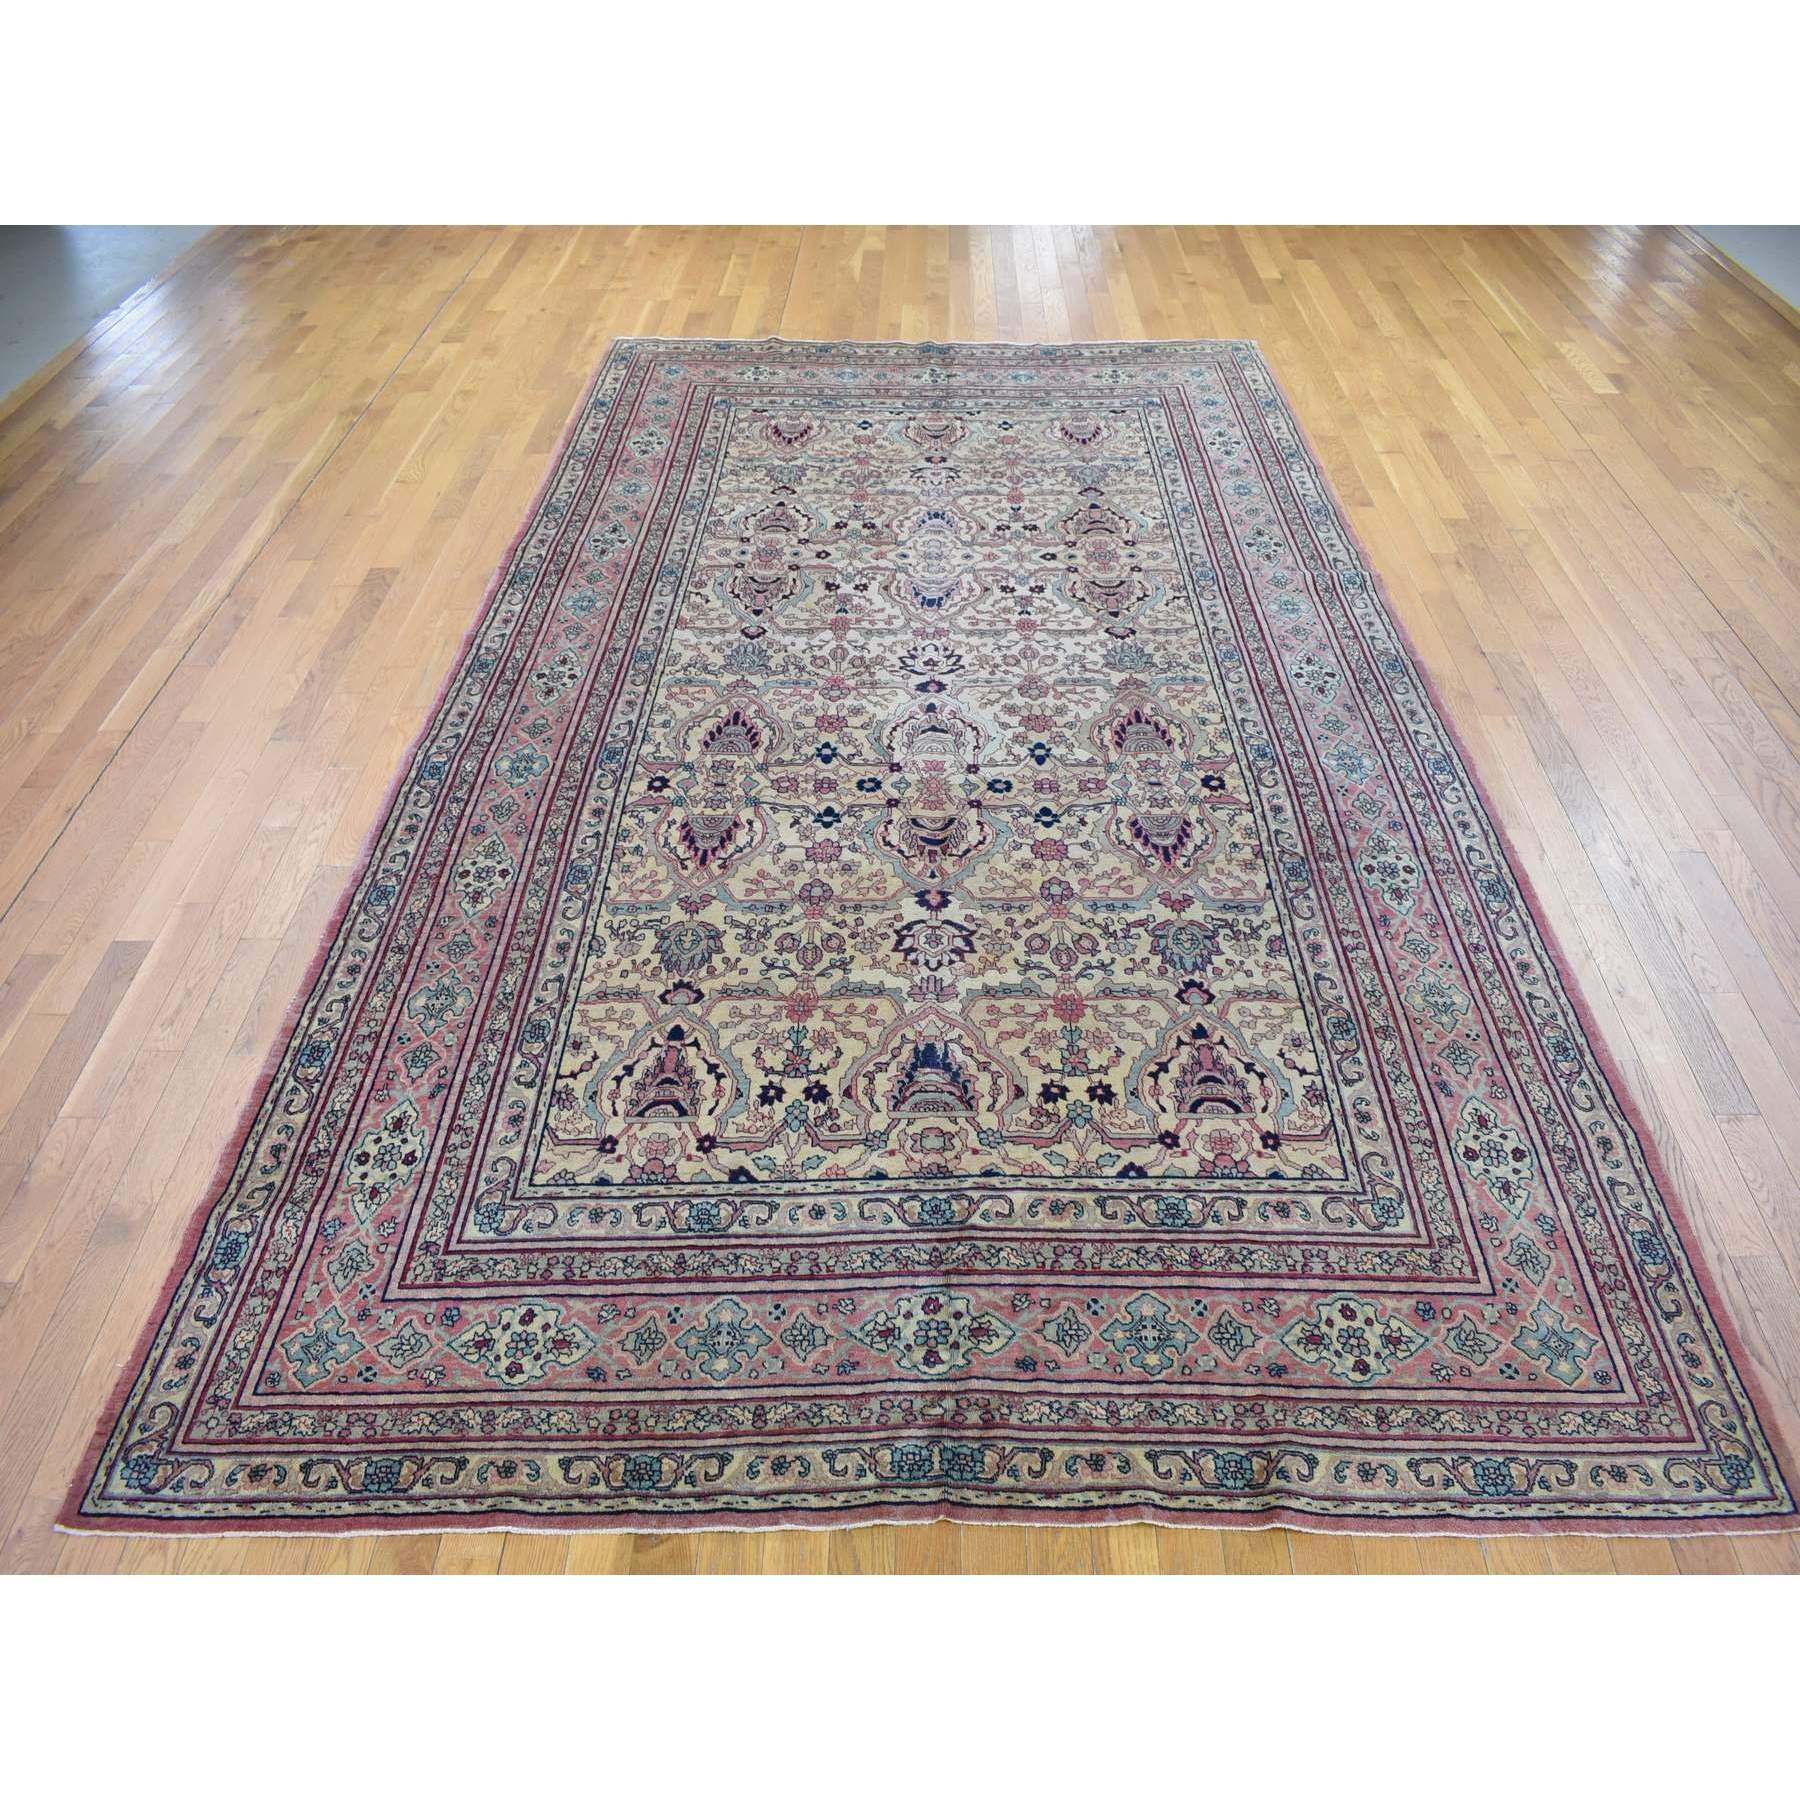 This fabulous hand-knotted carpet has been created and designed for extra strength and durability. This rug has been handcrafted for weeks in the traditional method that is used to make
Exact Rug Size in Feet and Inches : 7'7